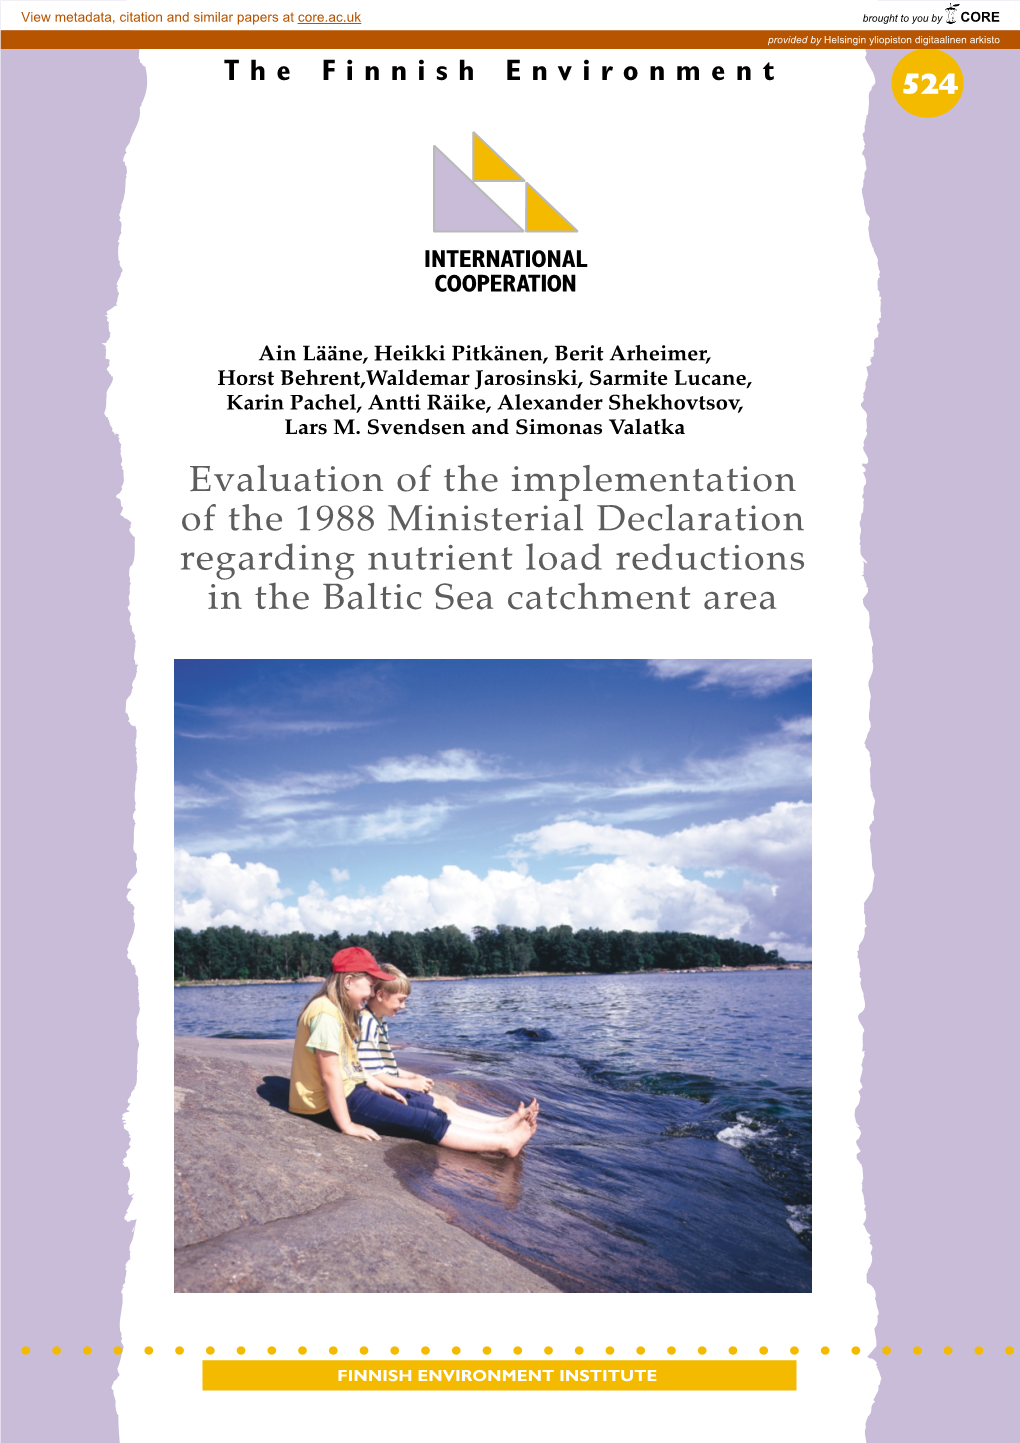 Evaluation of the Implementation of the 1988 Ministerial Declaration Regarding Nutrient Load Reductions in the Baltic Sea Catchment Area